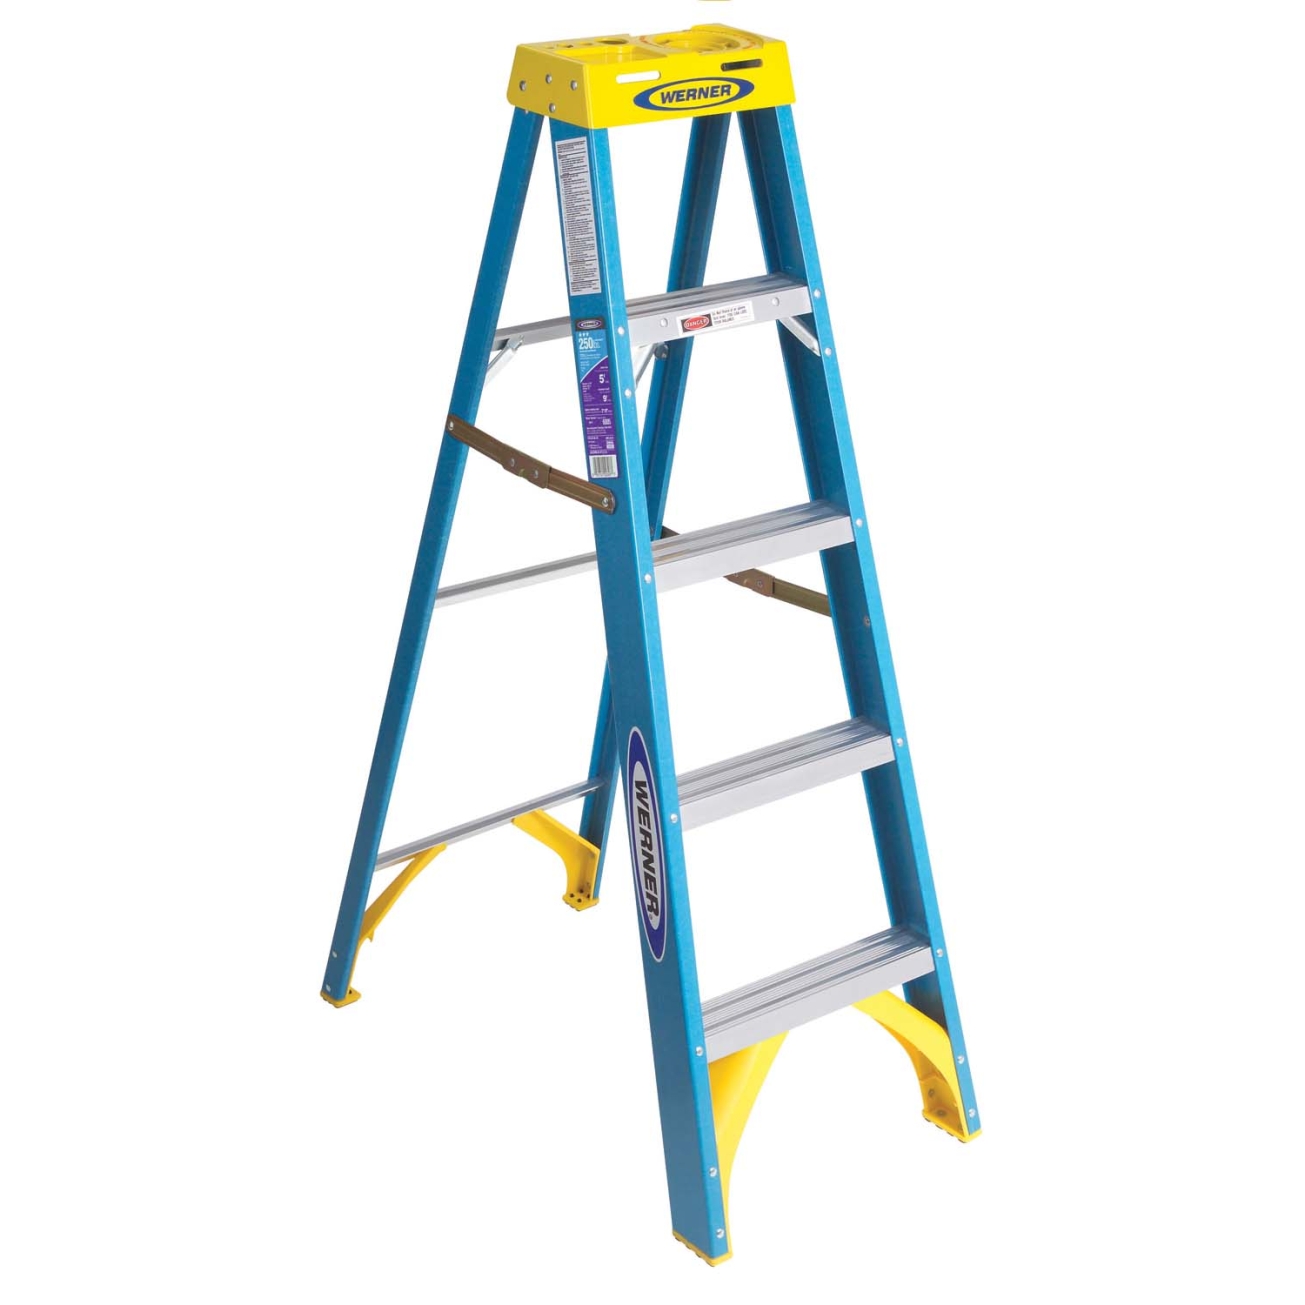 Step Ladders - Folding, Aluminum & Wooden Ladders at Ace Hardware